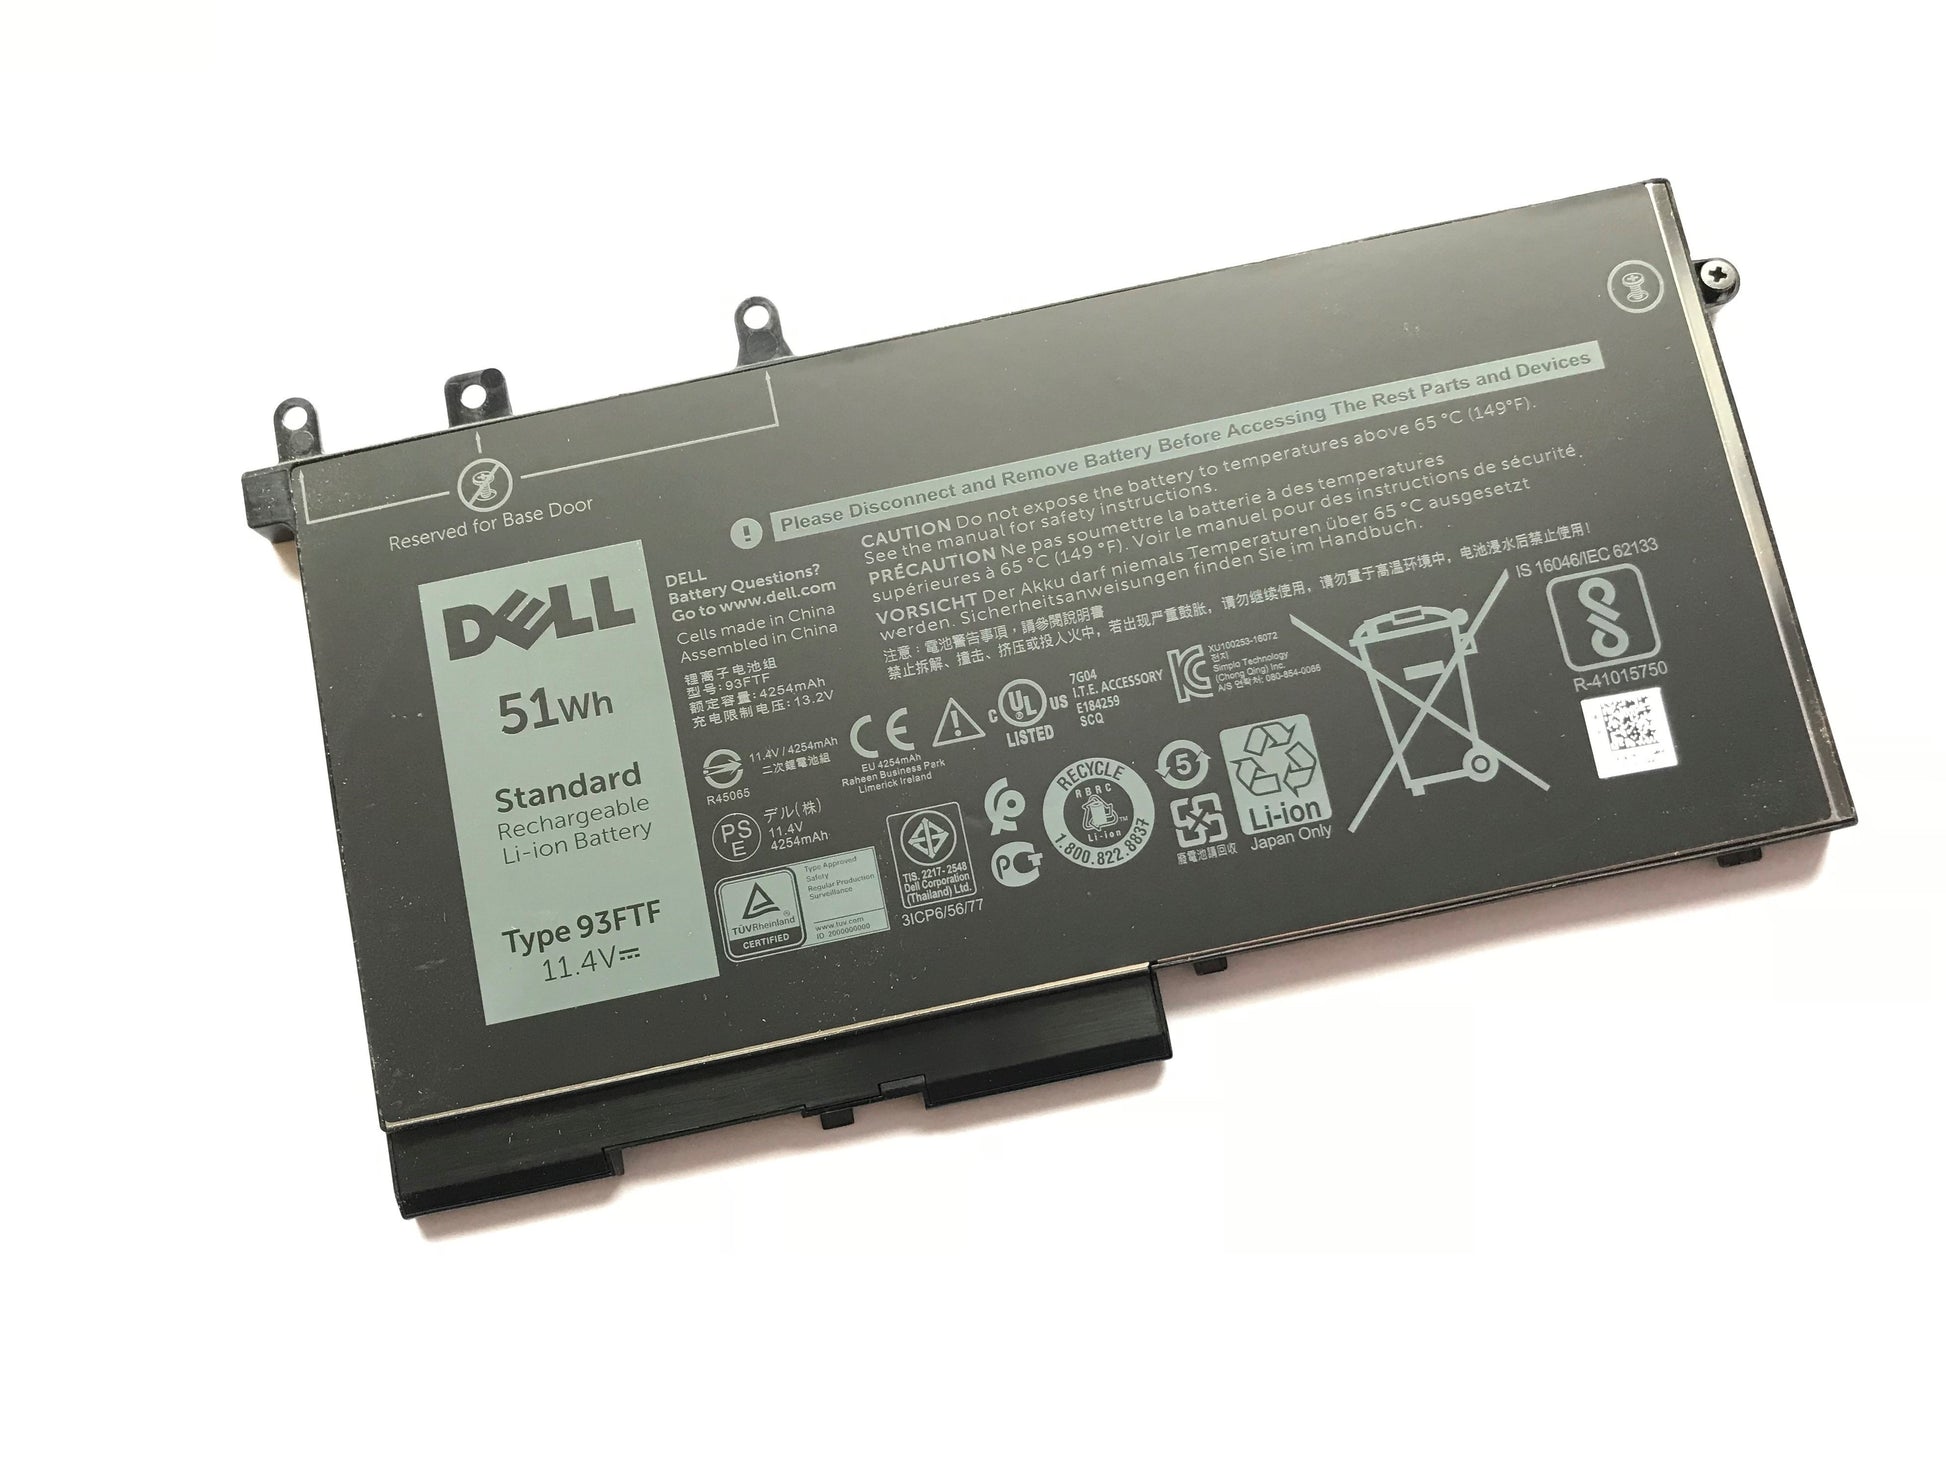 Dell Latitude 5280, 5480, 5580, 5490, 5495 Laptop Battery 3 cell 51wh 93FTF | Black Cat PC